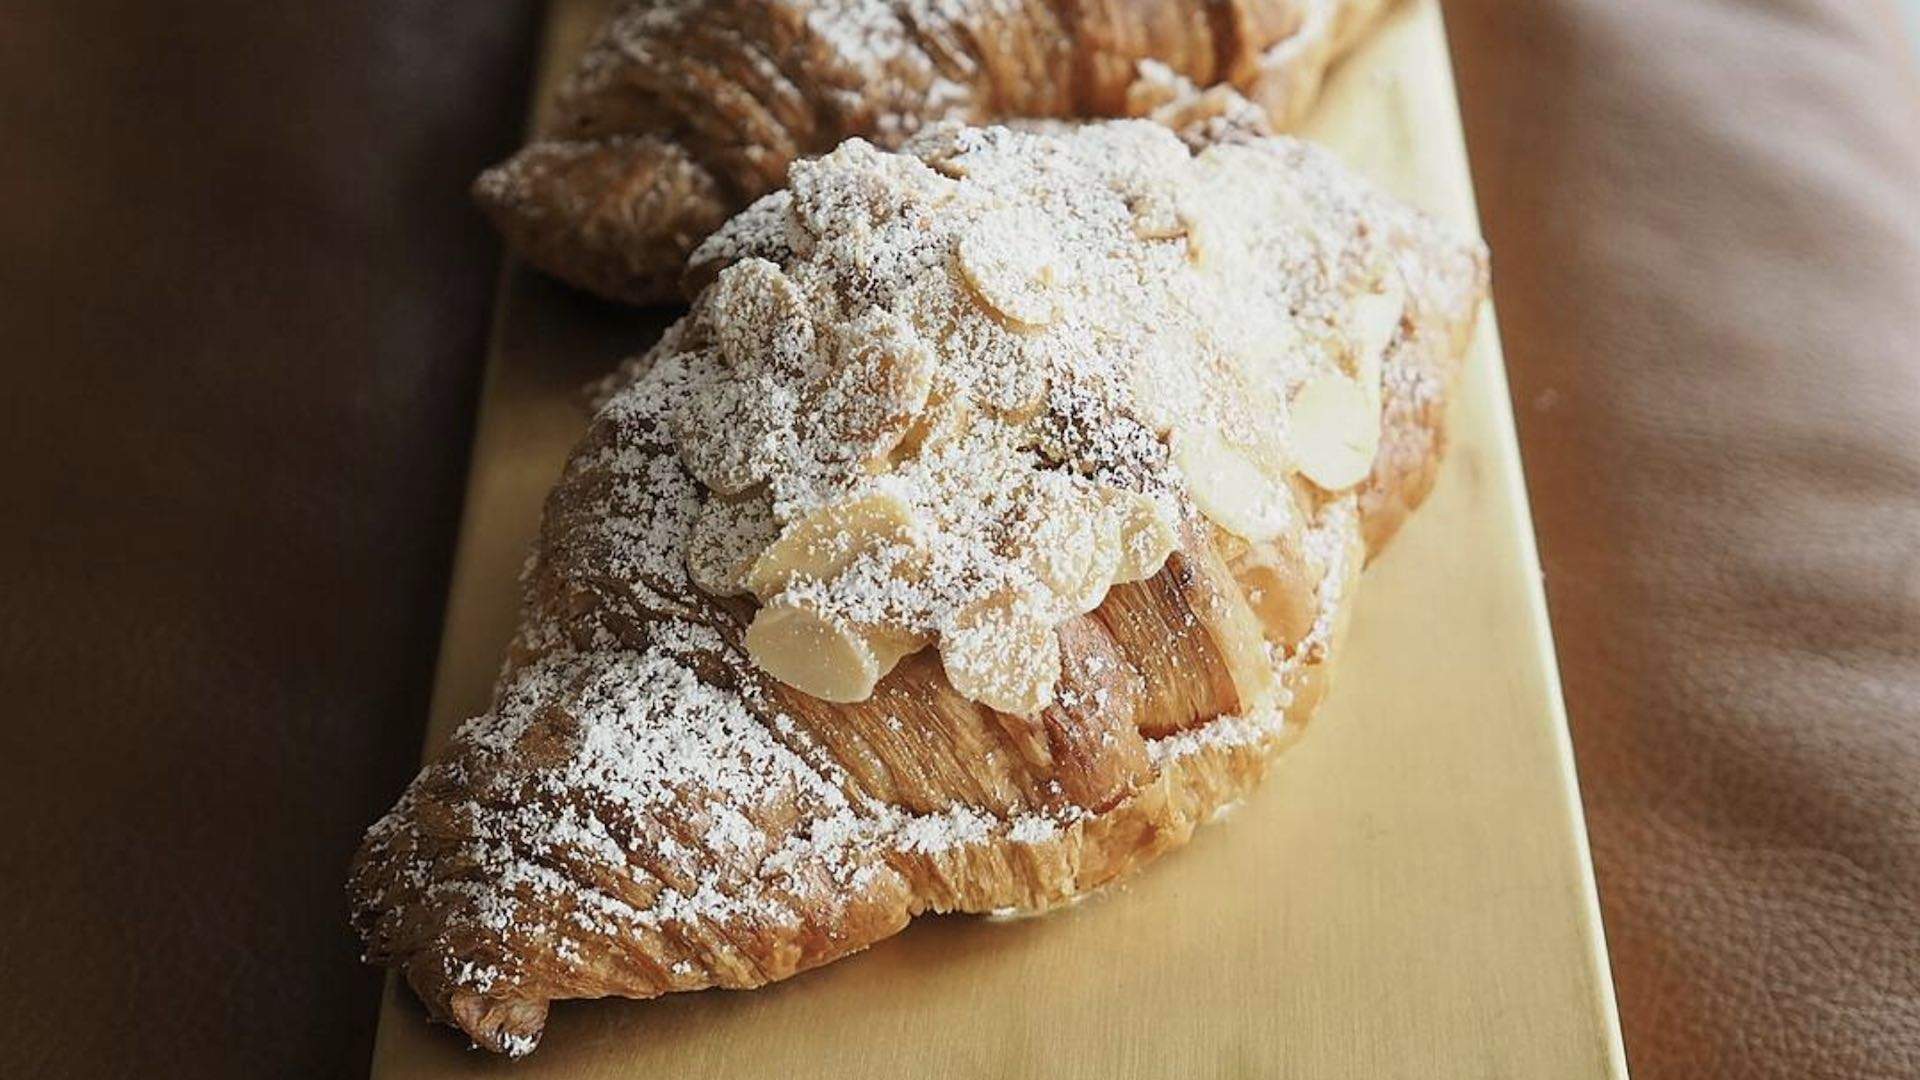 Almond Croissant from Chu Bakery in Perth